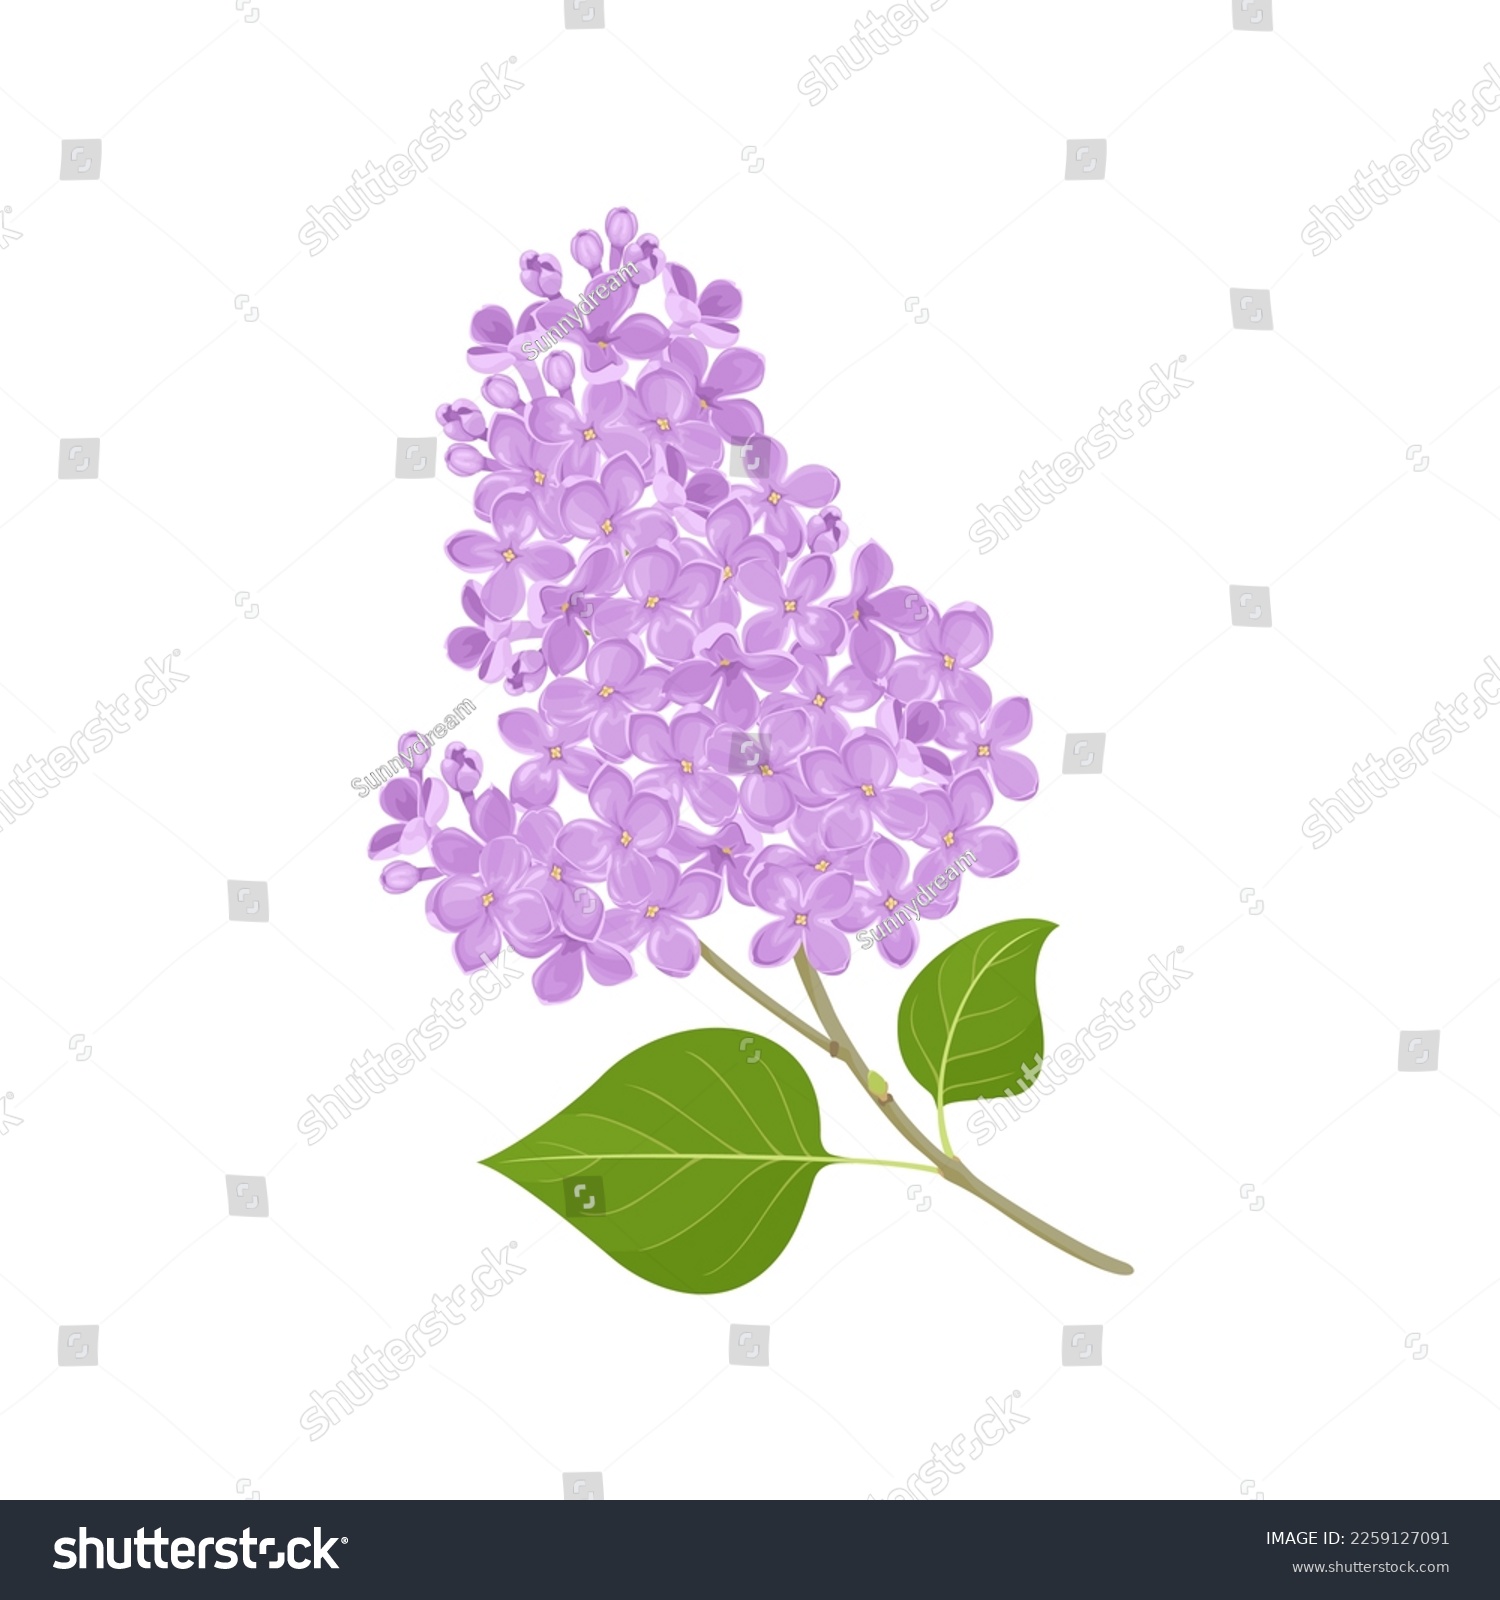 SVG of Lilac flowers isolated on white background. Vector cartoon illustration of Lilac branch with green leaf. Blooming spring plant. Botanical design element. svg